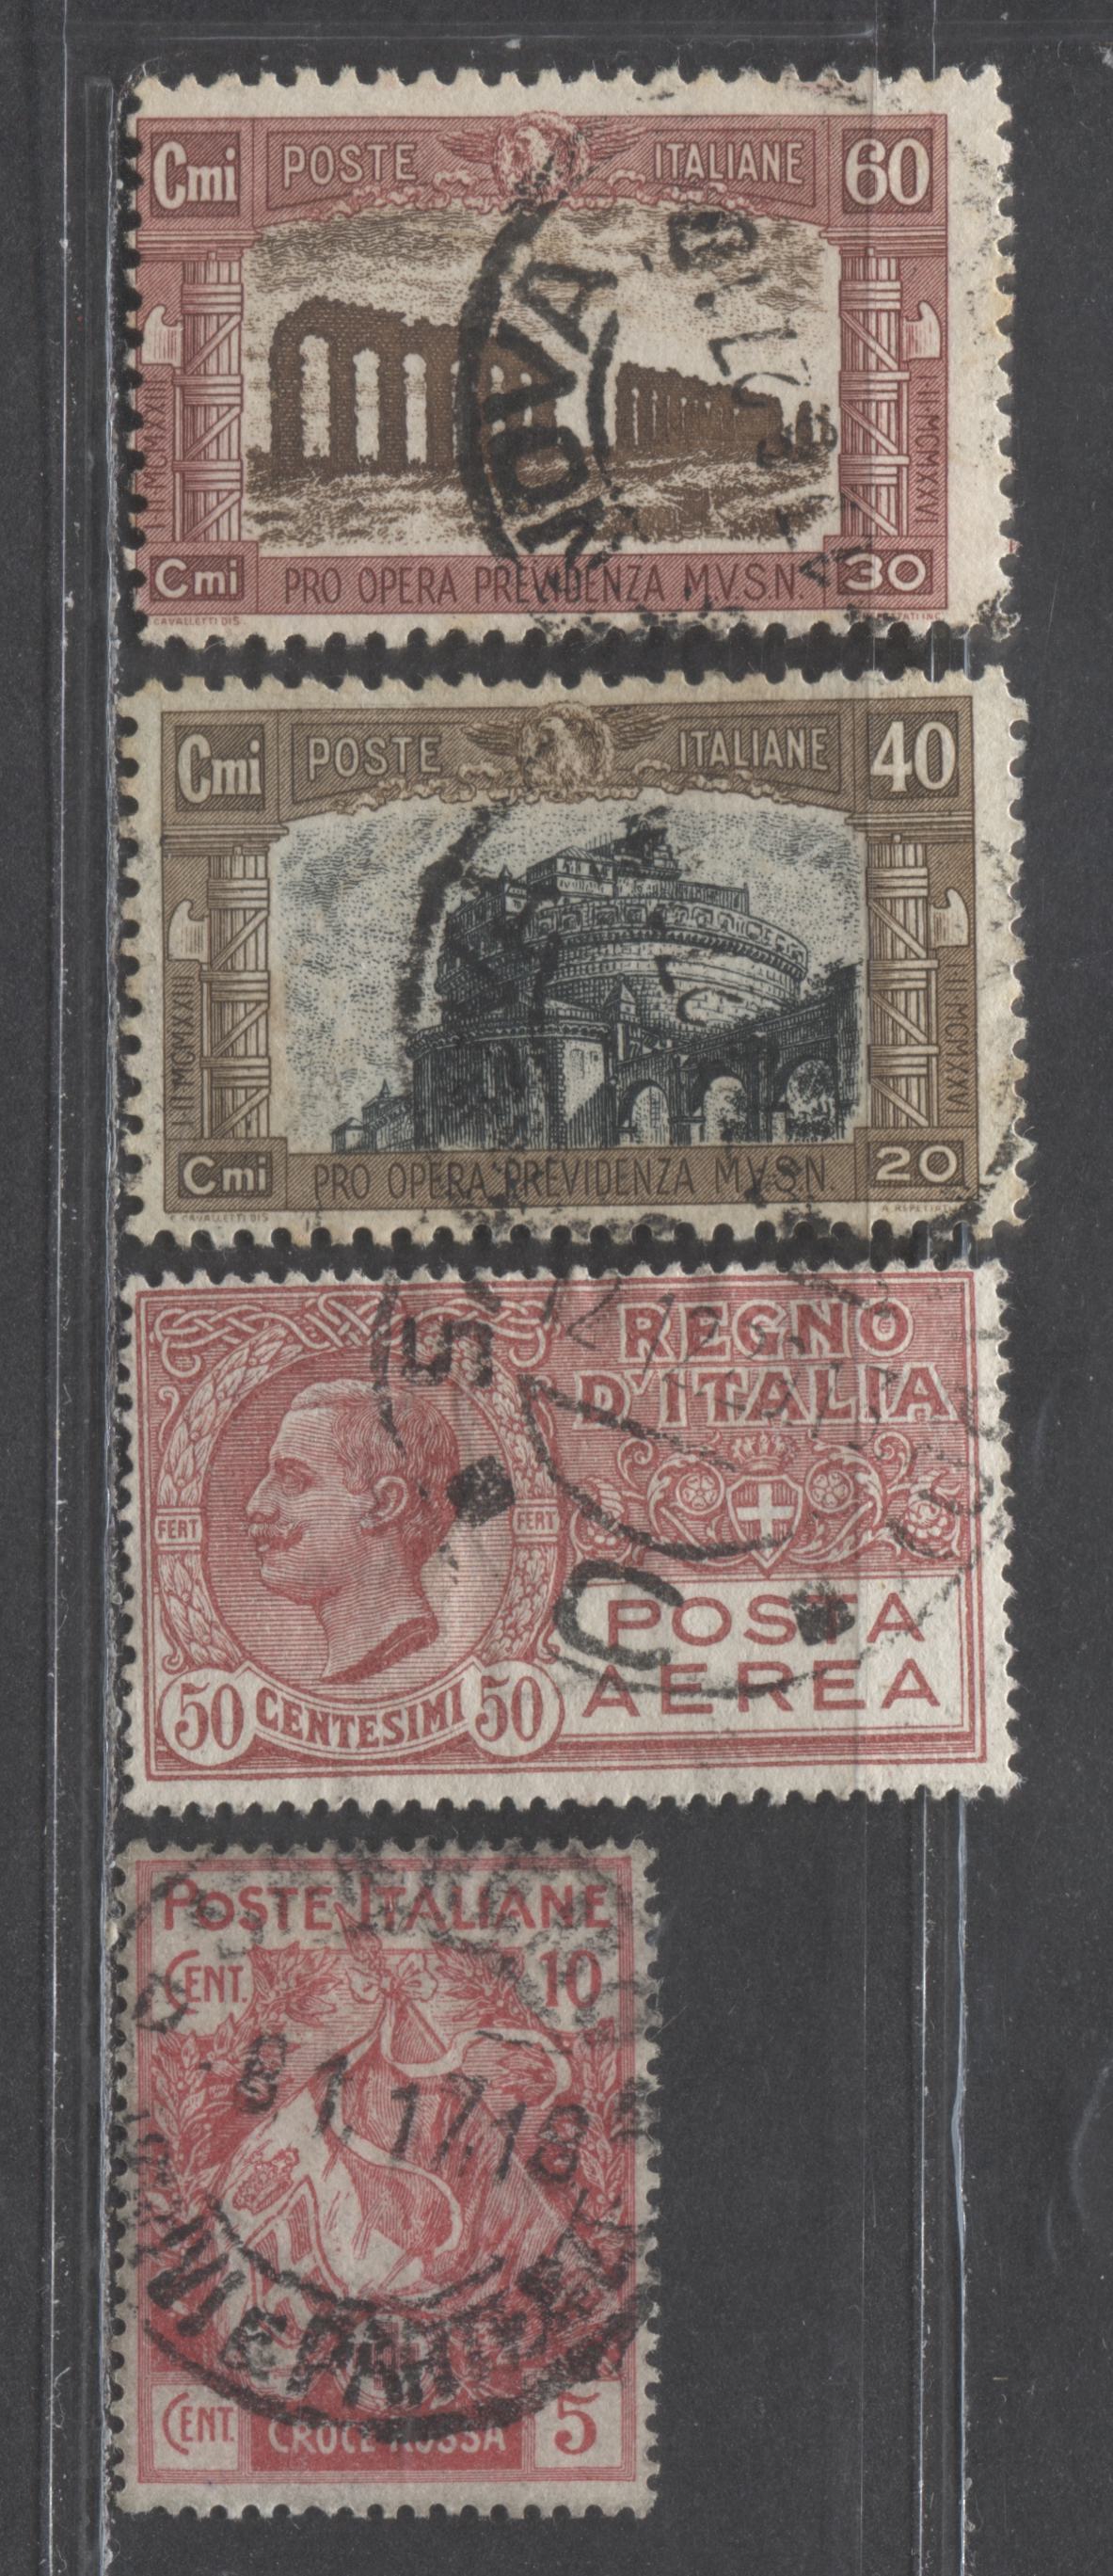 Lot 405 Italy SC#B1/C3 1916-1926 Semi Postals & Airmails, 4 Very Good/Fine Used Singles, Click on Listing to See ALL Pictures, Estimated Value $30 USD